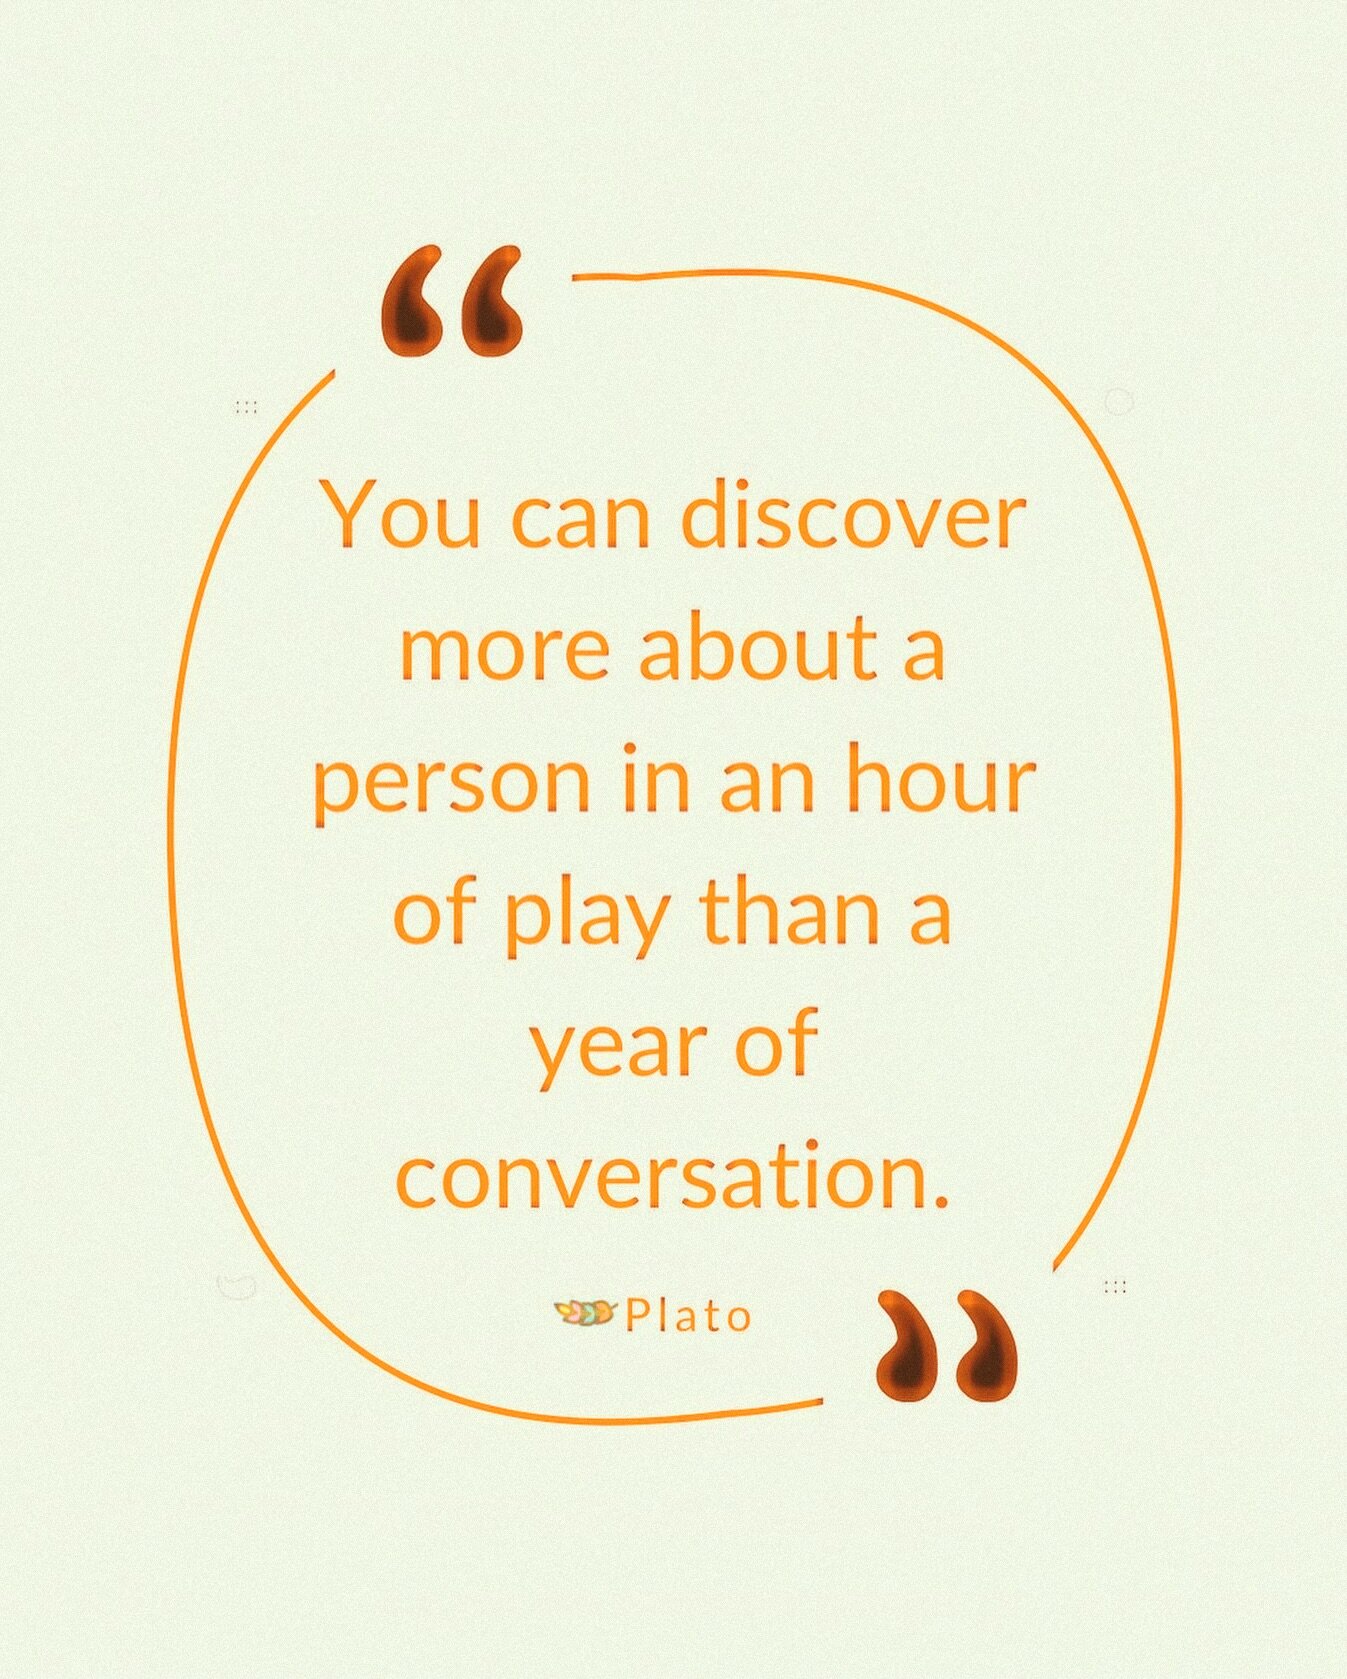 &ldquo;You can discover more about a person in an hour of play than  year of conversation.&rdquo; &mdash;Plato
.
.
.
.
.

#parentingtips #kidscounseling #parenting #adulting #playtherapy #dfwplaytherapy #familytherapy #strongerfamily #dfwcounselors #